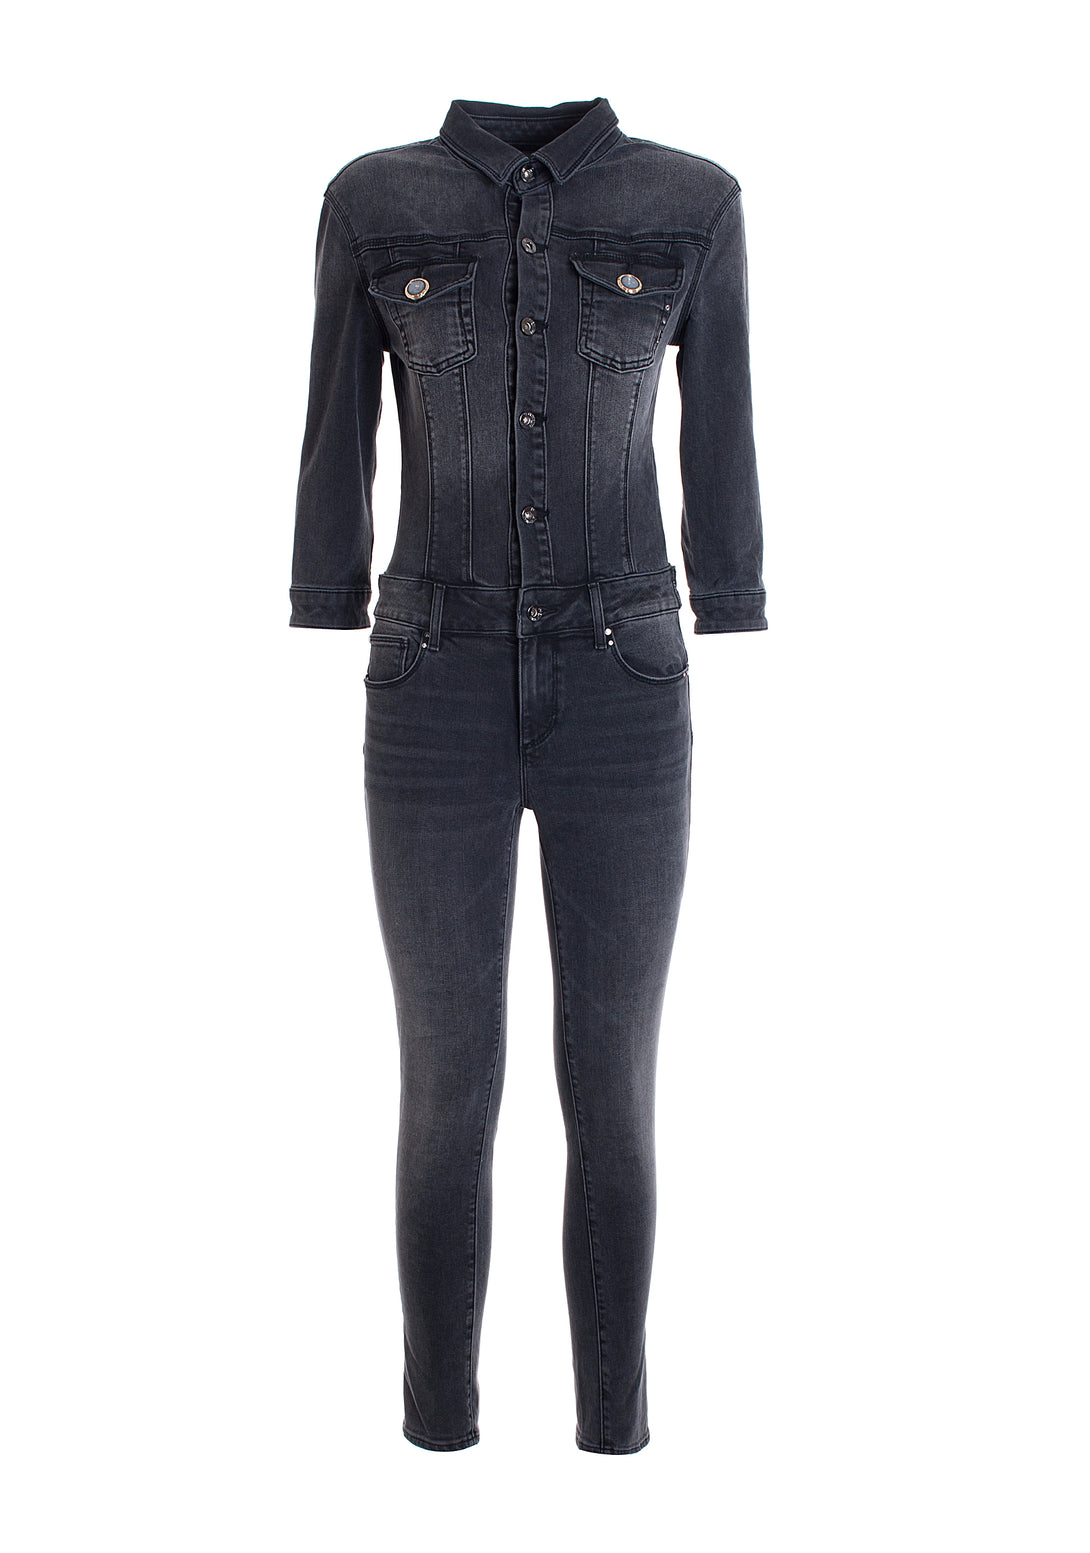 Jumpsuit tight fit, long, made in black denim with dark wash